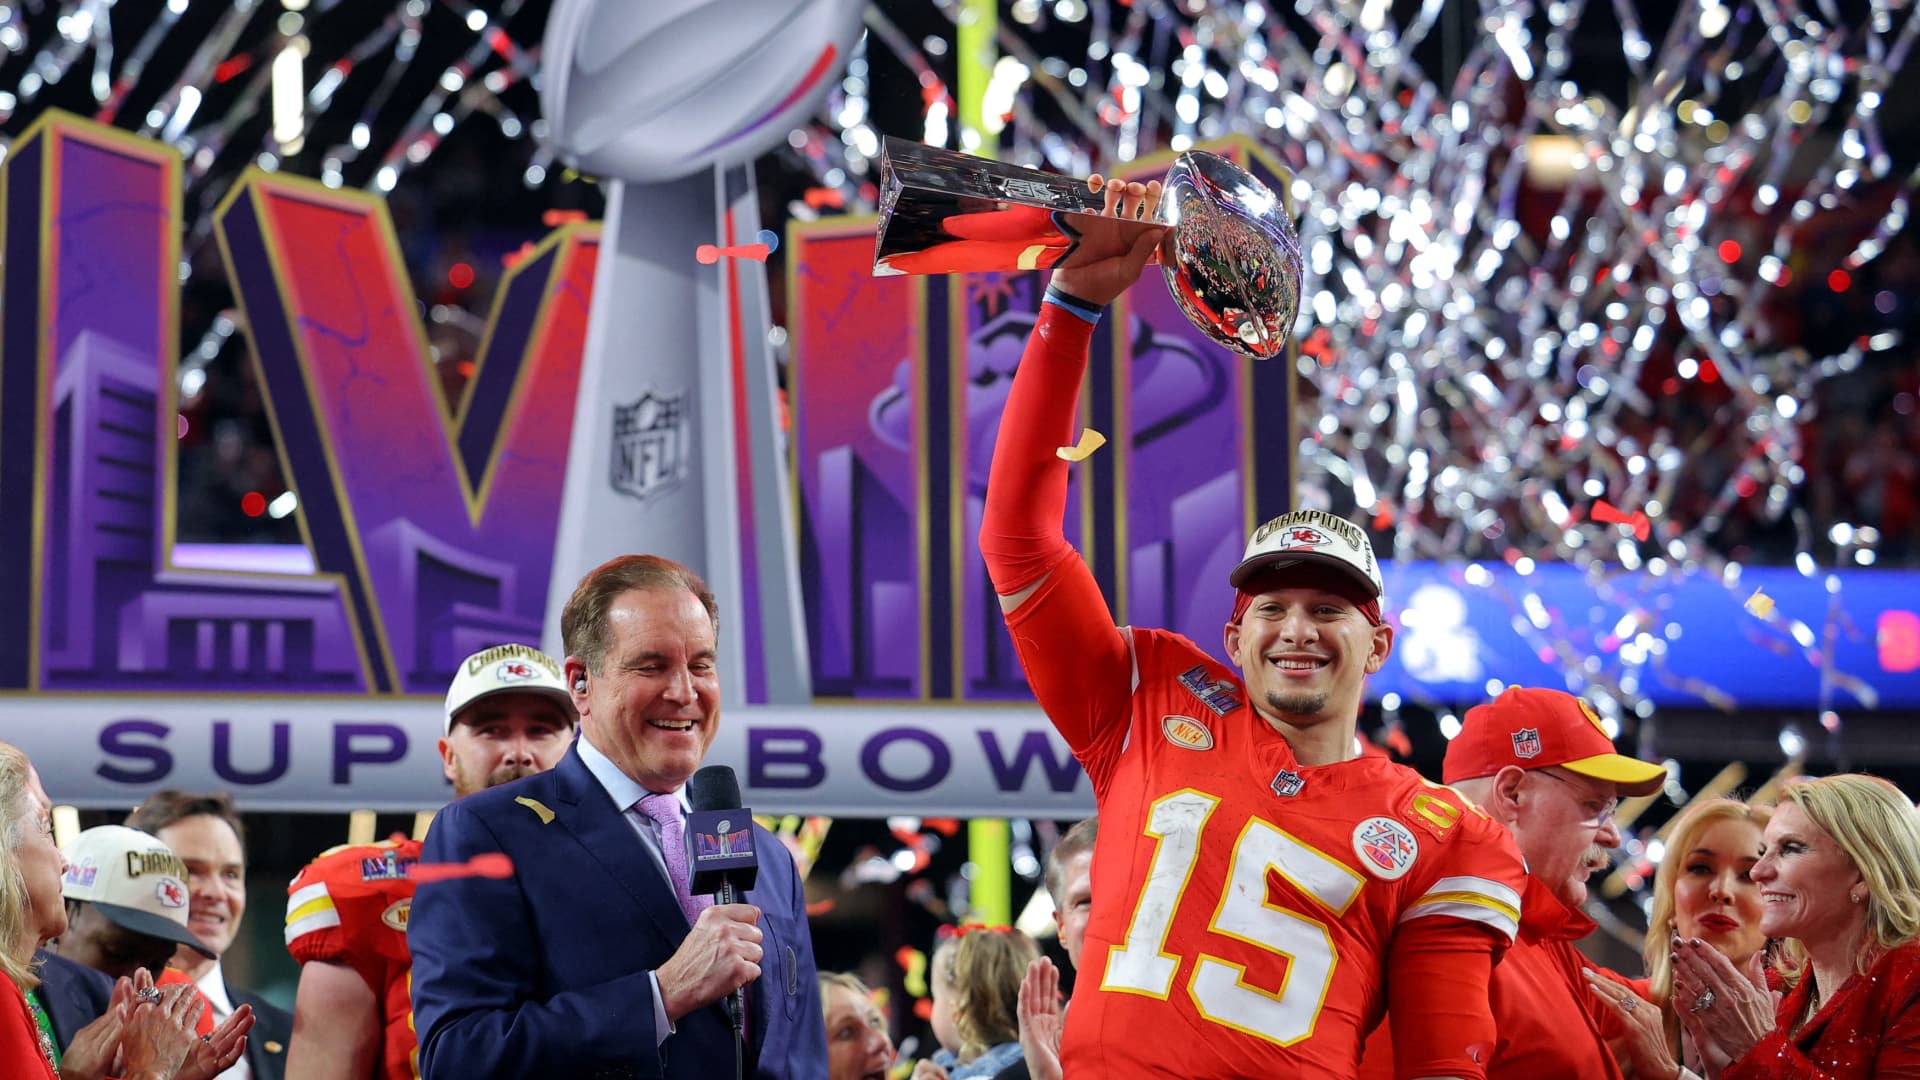 Super Bowl LVIII was most-watched television show ever with 123 million viewers